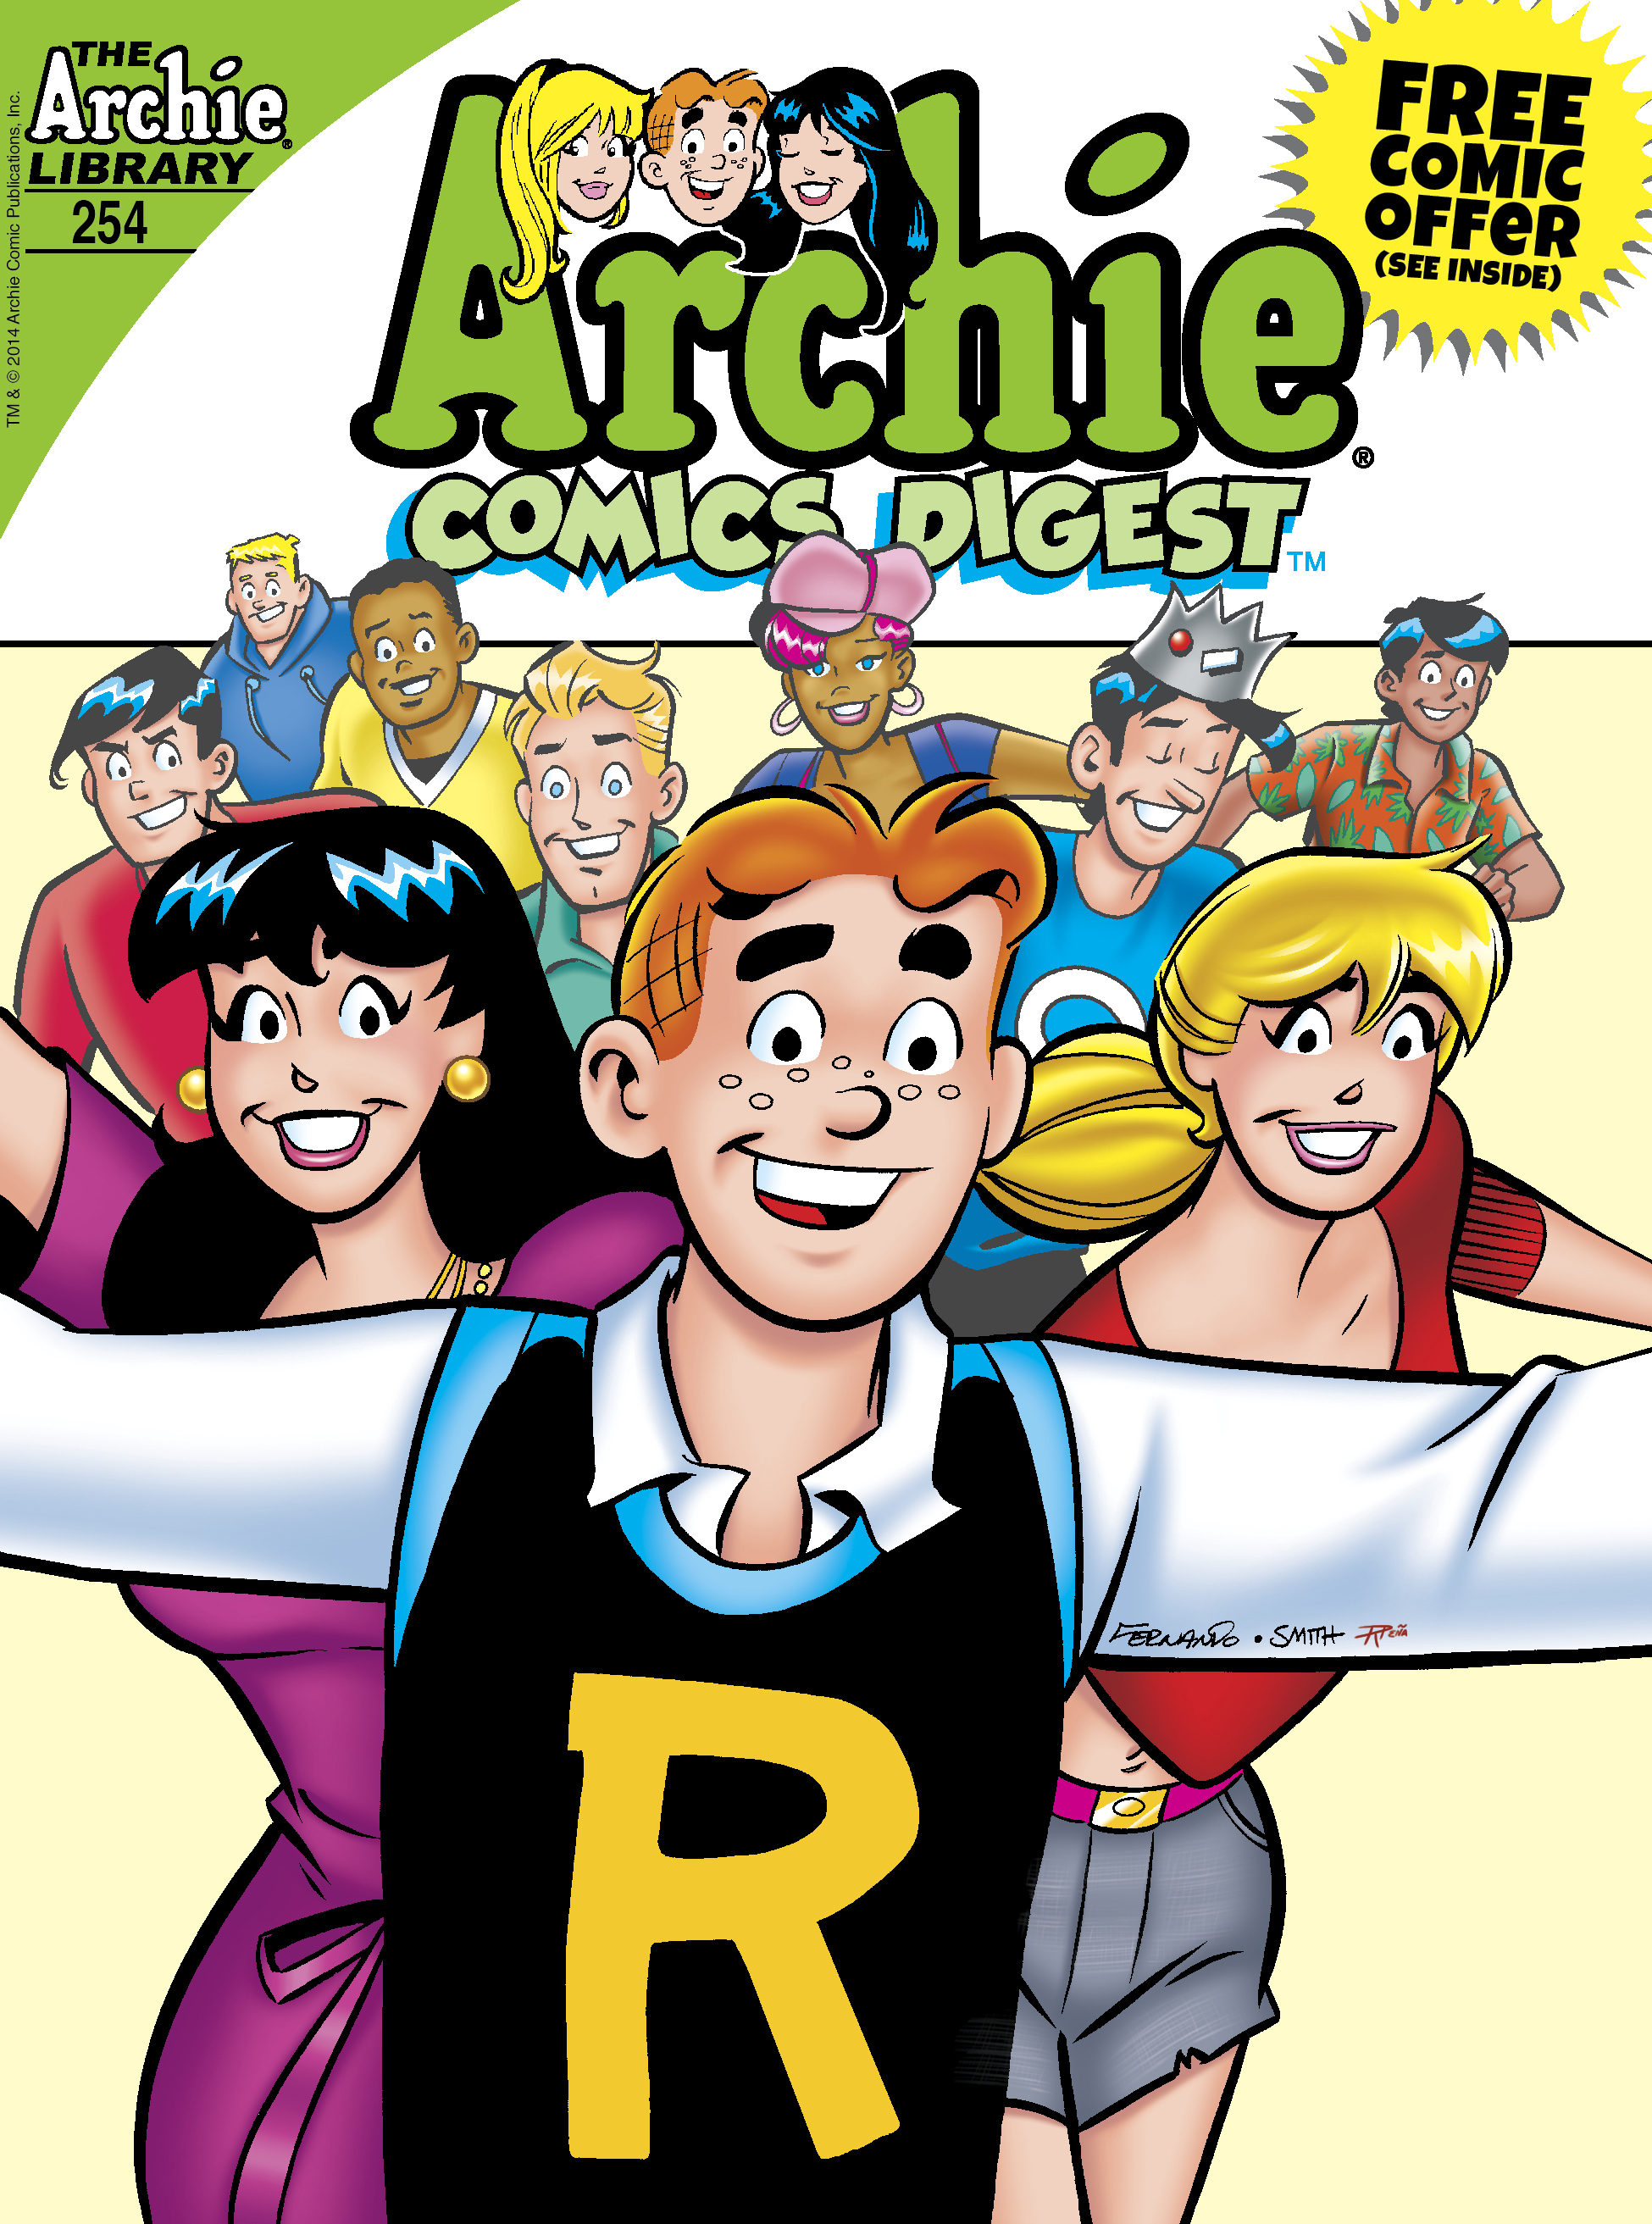 Archie Ics August Covers And Solicitations Ic